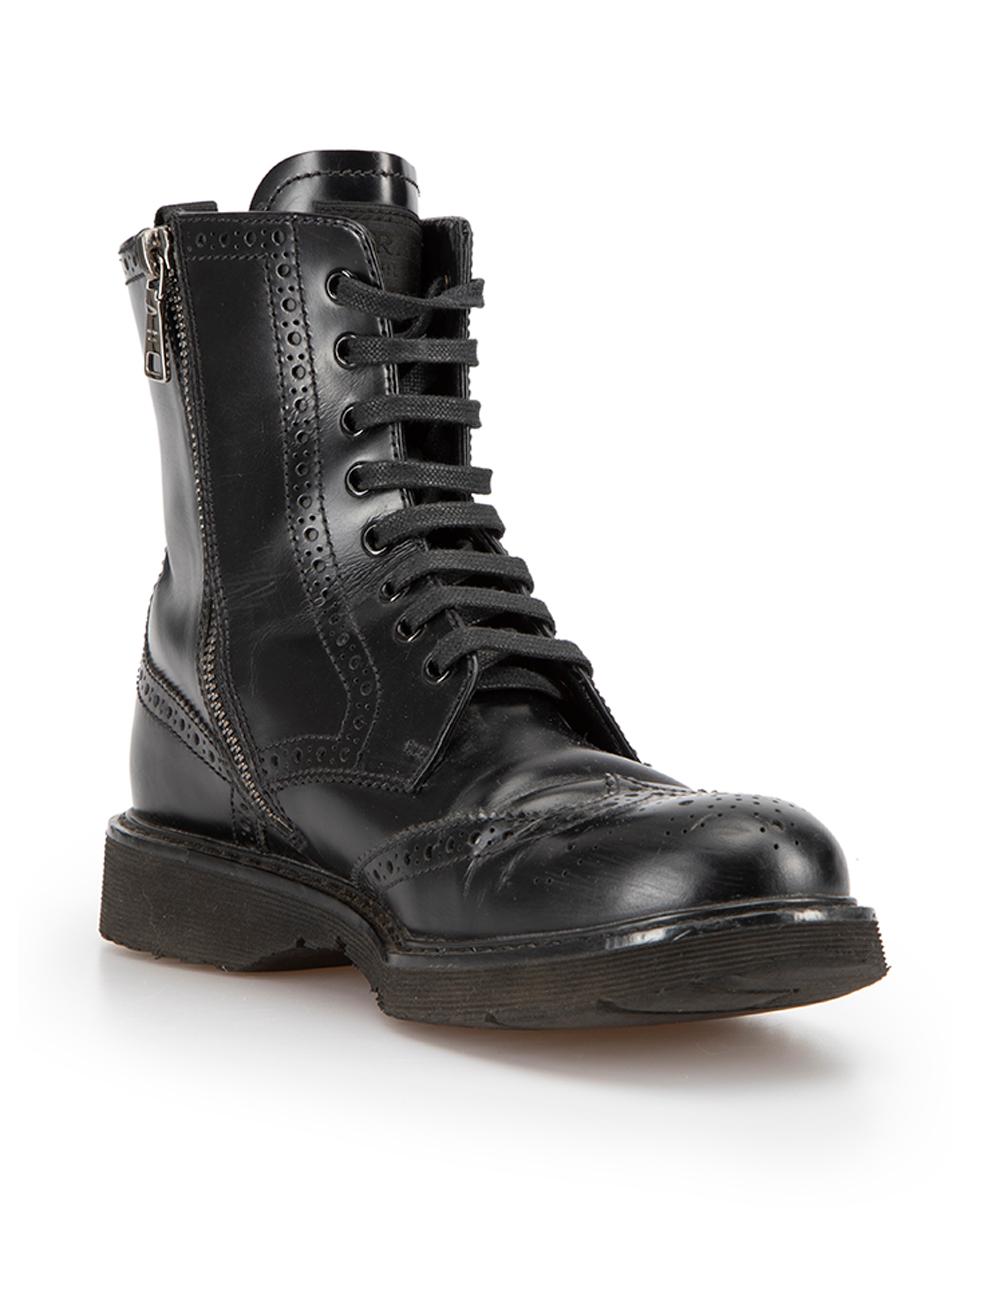 CONDITION is Good. General wear to boots is evident. Moderate signs of wear to the front of both boots with scuffs, both also have all-over creasing, right boot has unravelled stitching at the front side on this used Prada designer resale